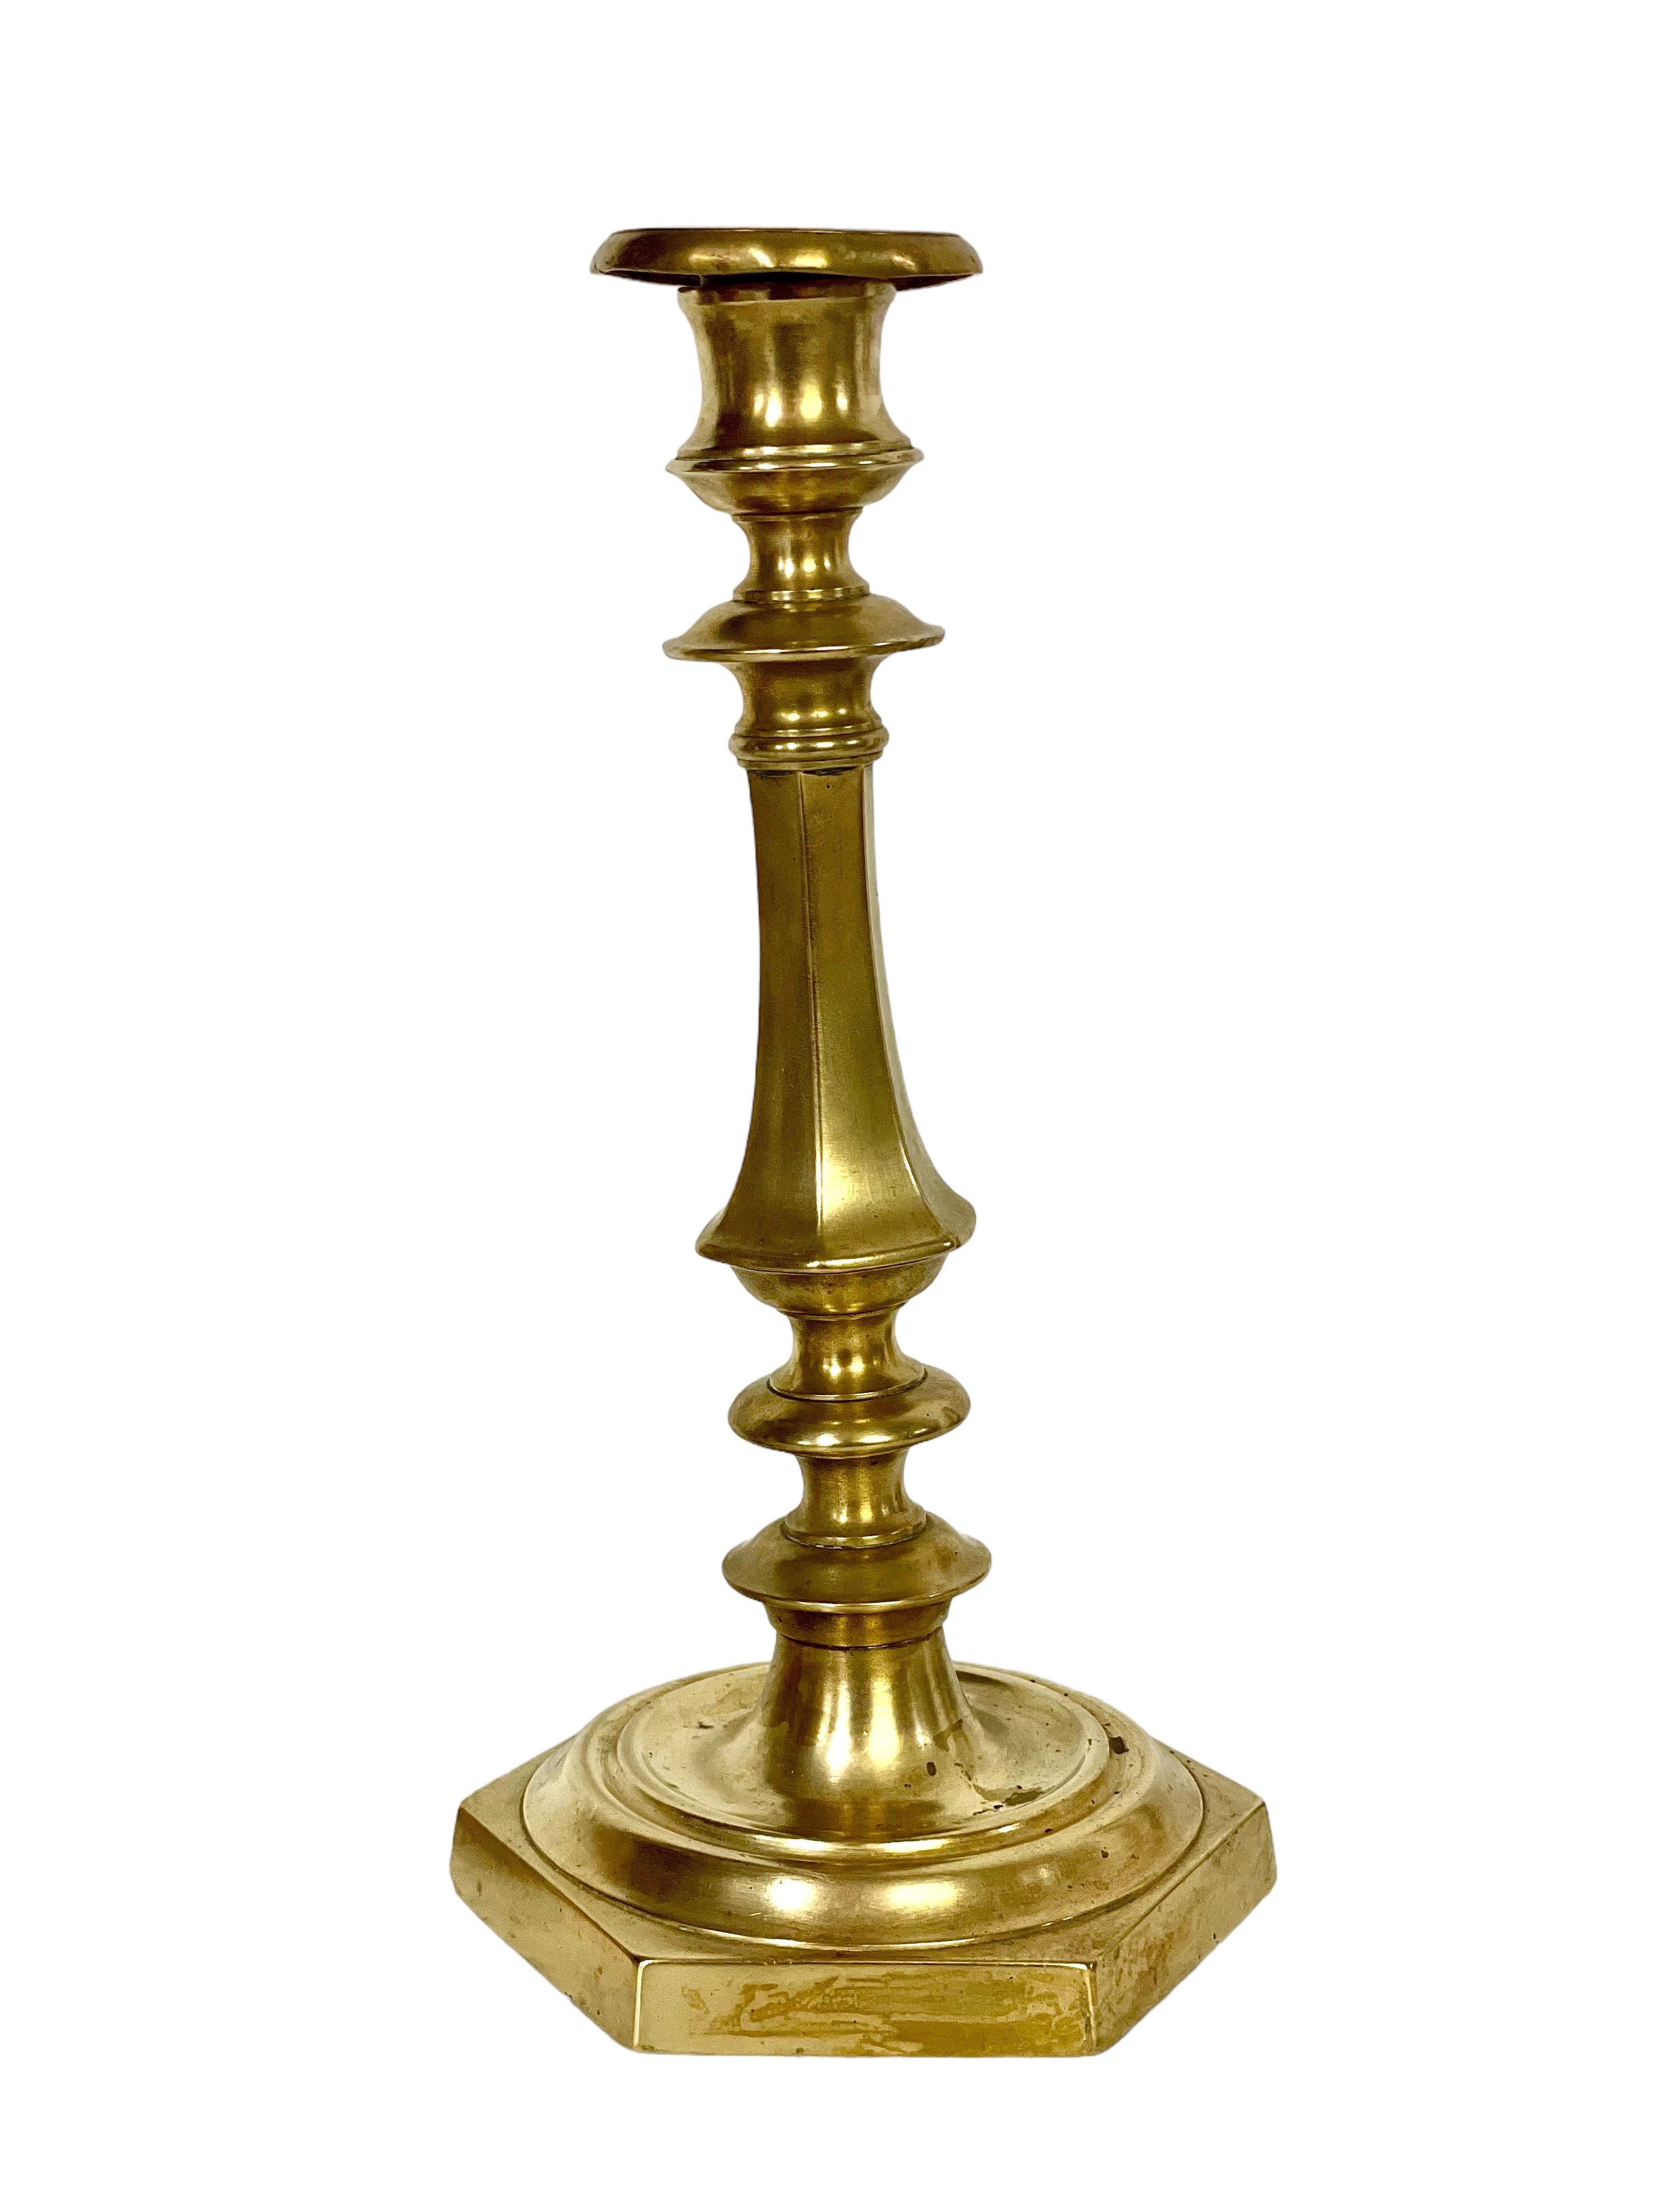 A fine pair of French “Flambeaux” gilt bronze candlesticks, dating from the 19th century, and crafted in a traditional baluster form. Rising from a heavy hexagonal base, each one has a turned, shaped and knopped stem, terminating in a simple but